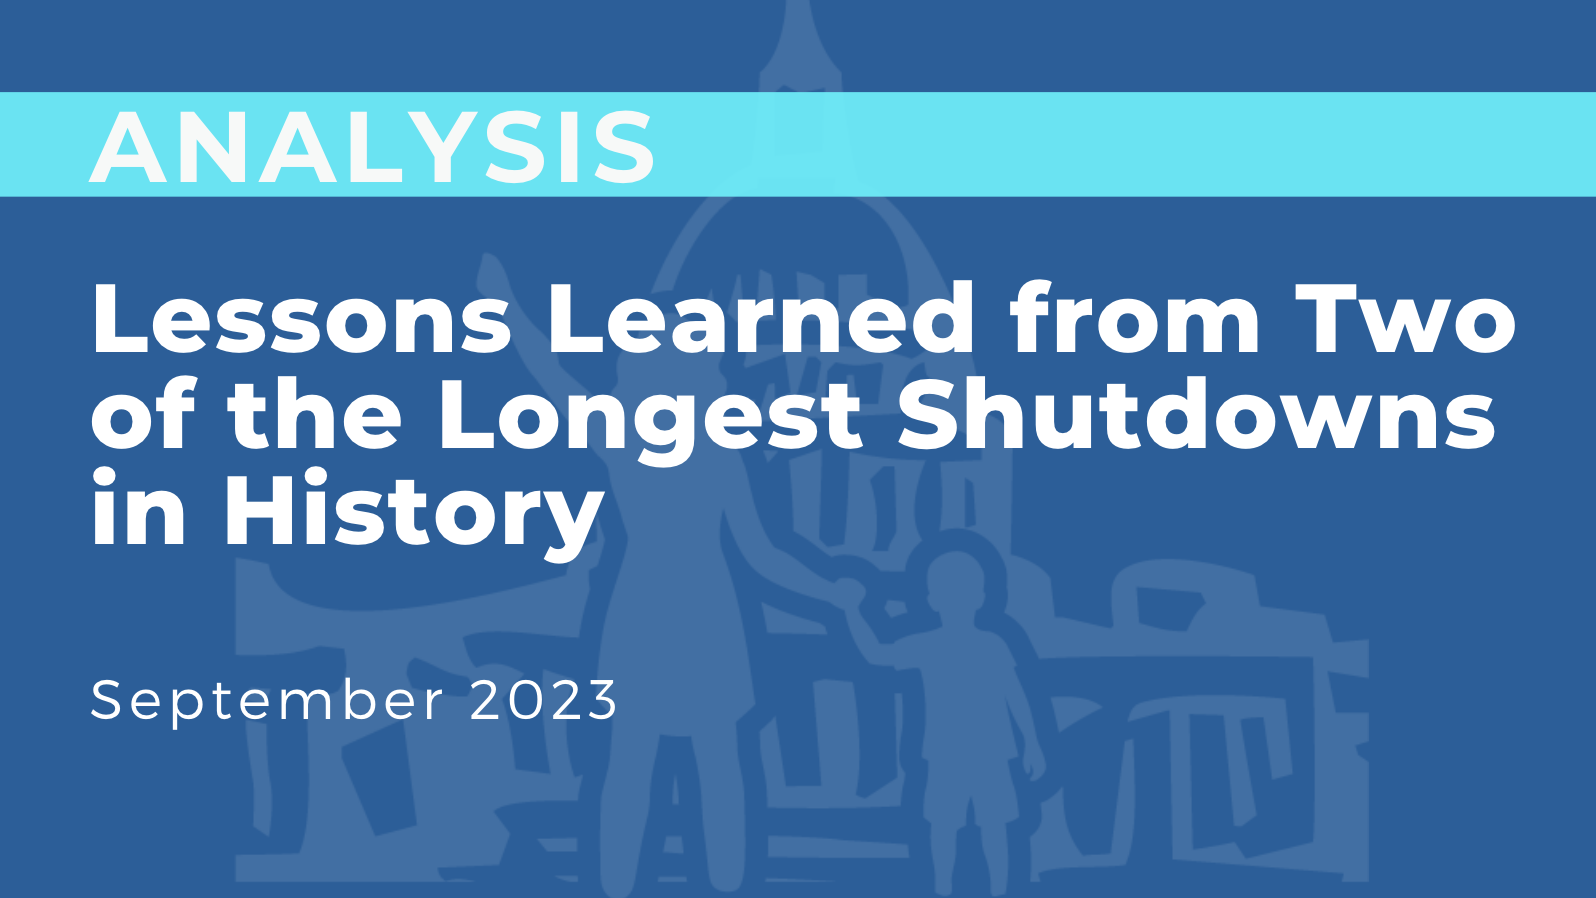 Lessons Learned from Two of the Longest Shutdowns in History